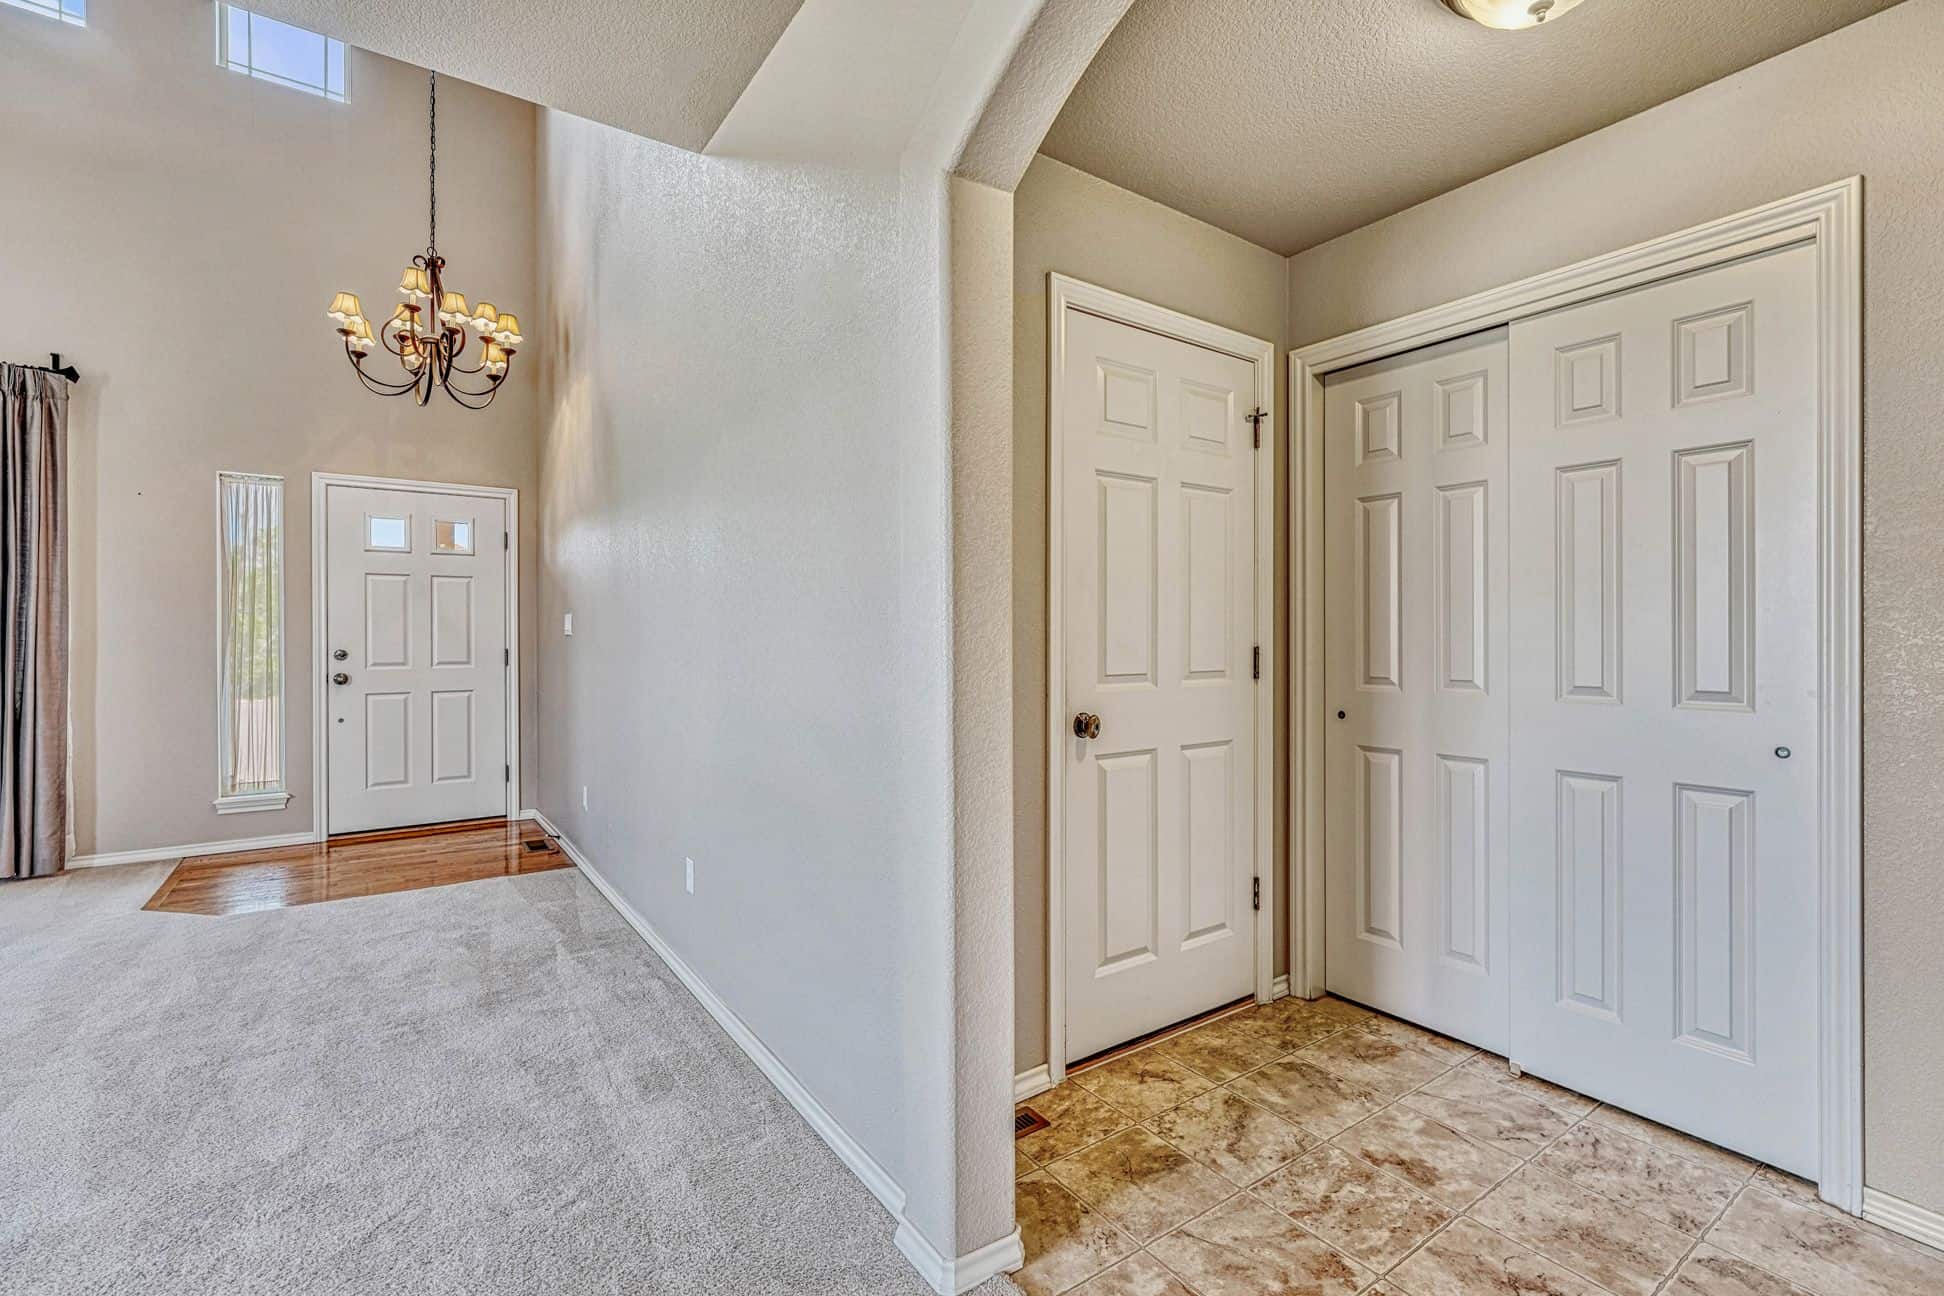 Coat Closet and Garage Access off the Entry